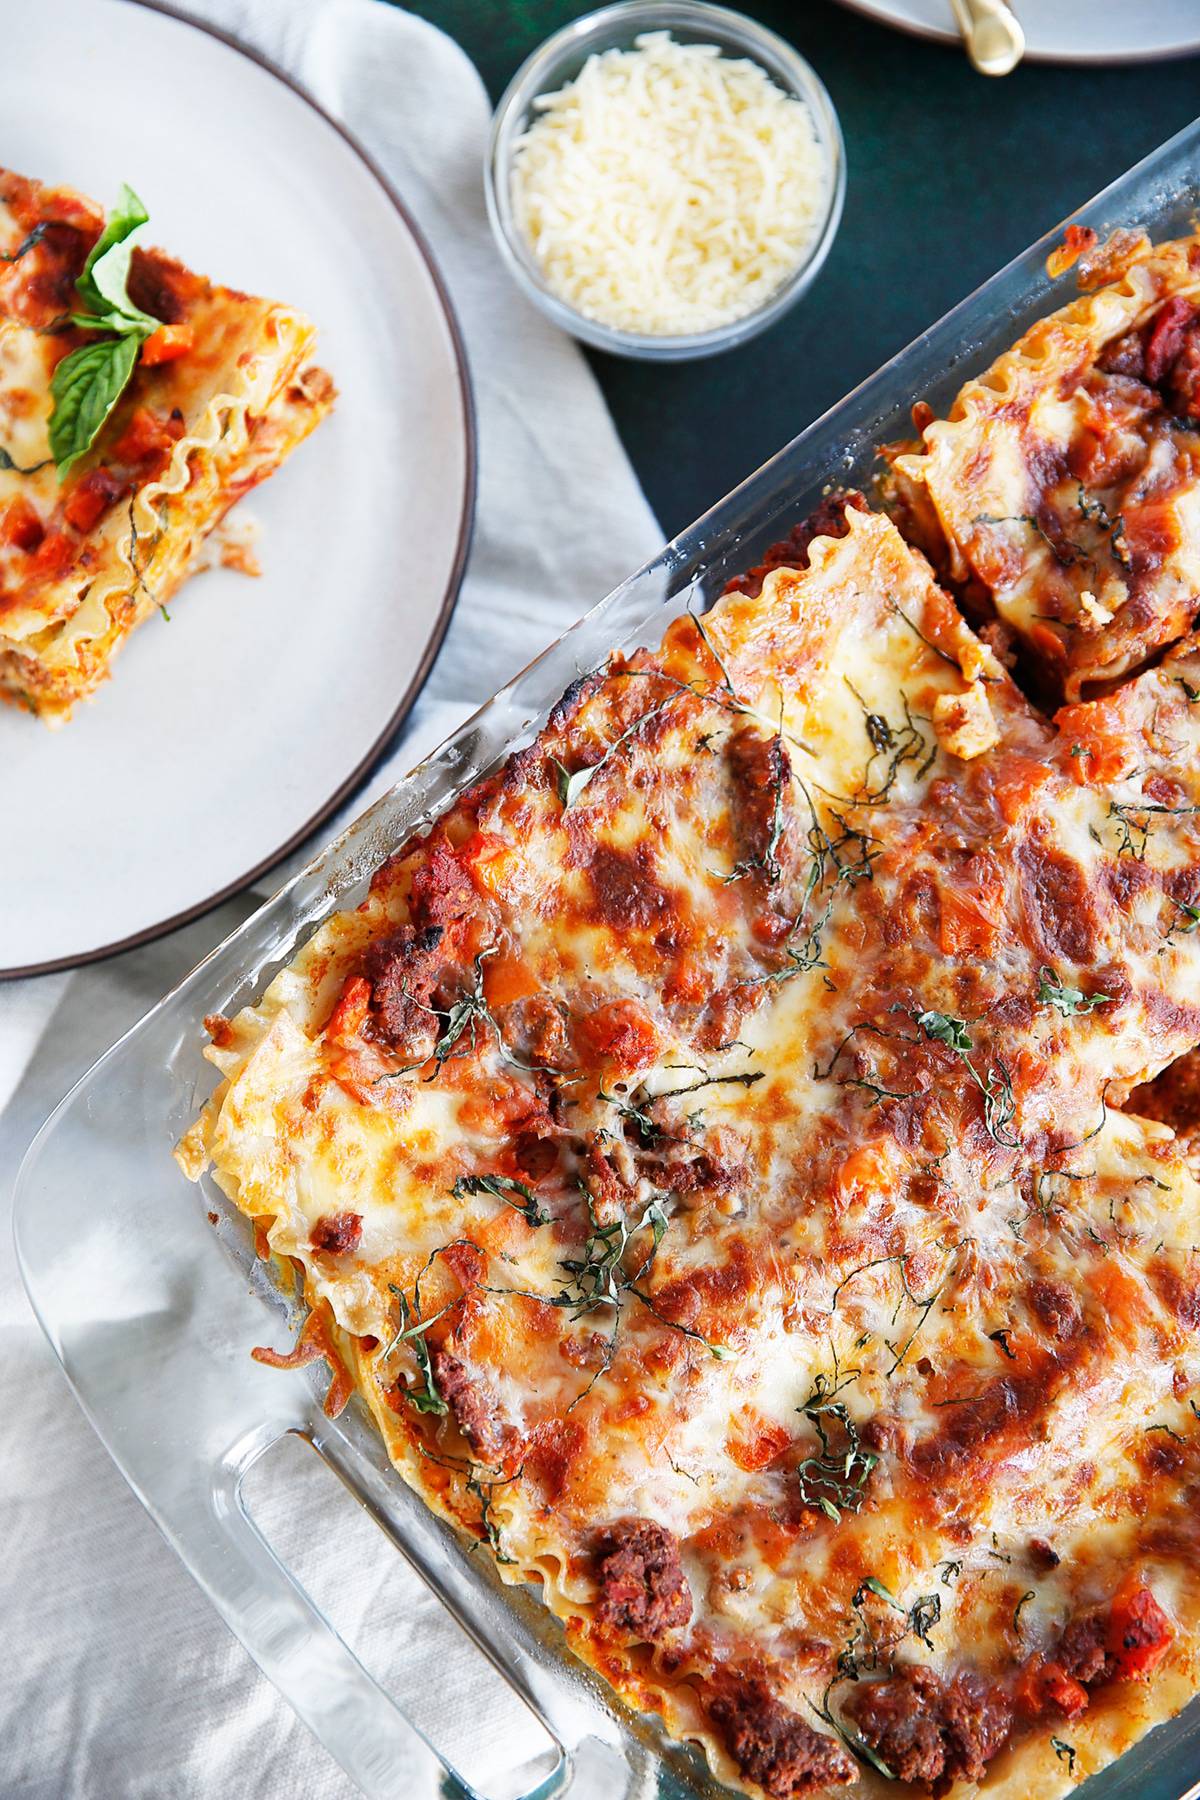 which supermarket does the best lasagna